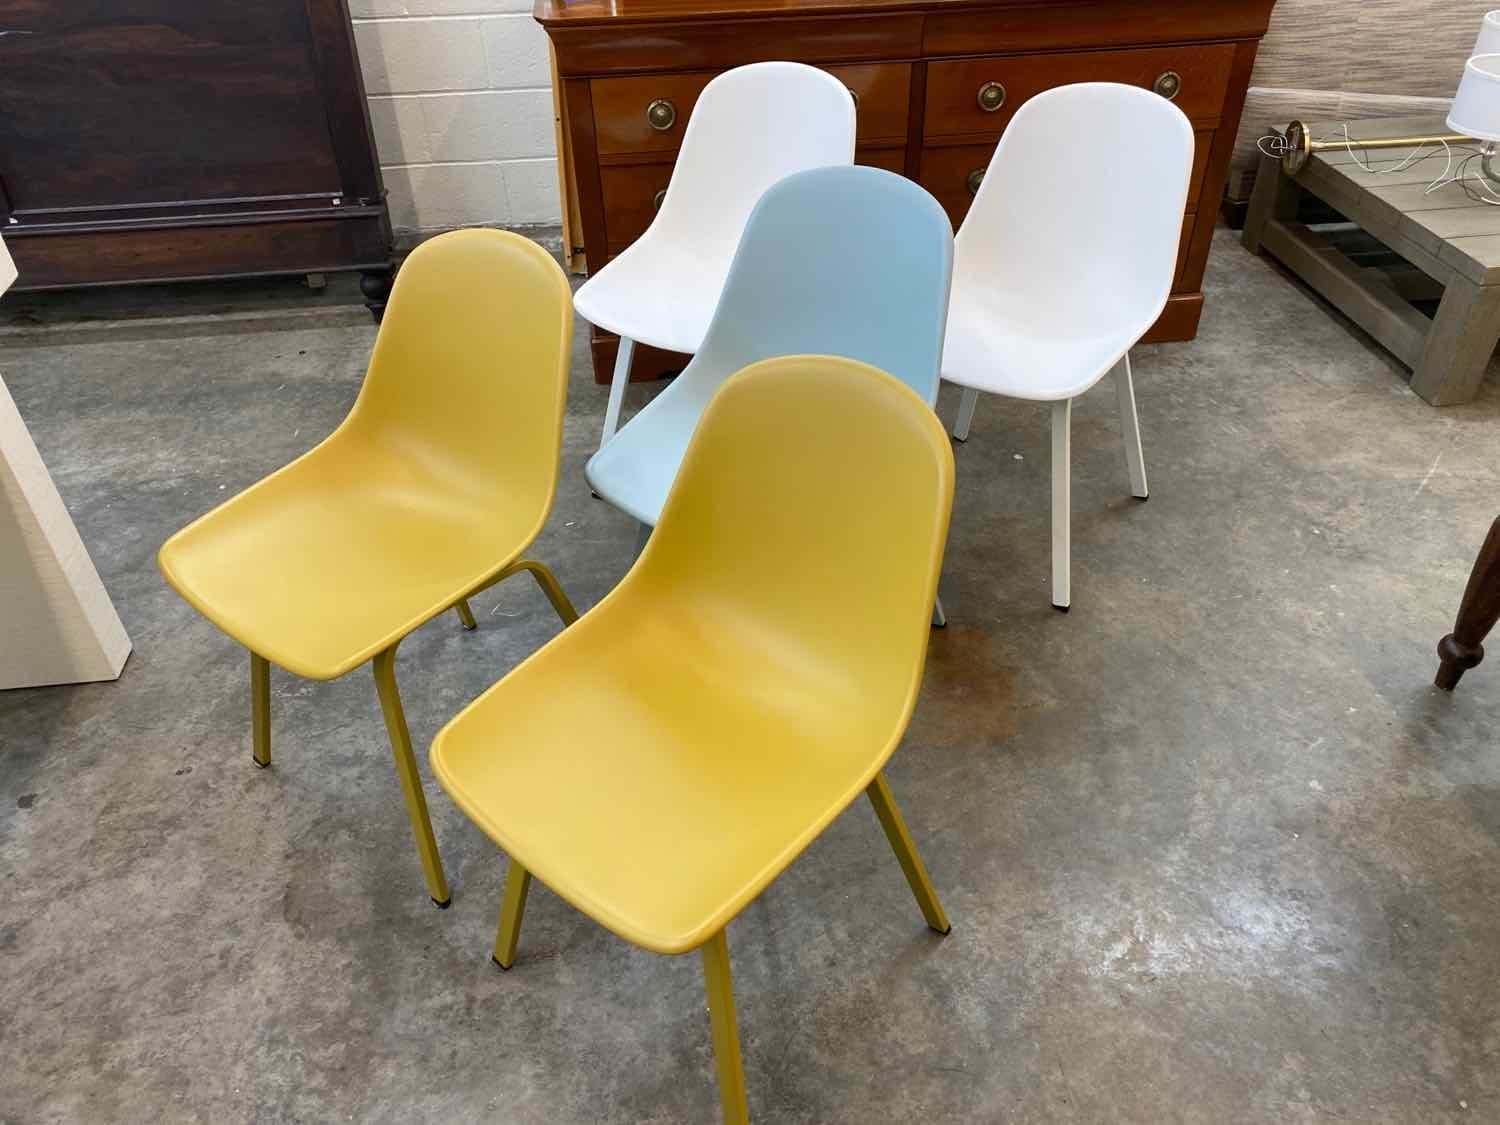  Set of 5 Multi-Color Plastic Chairs 